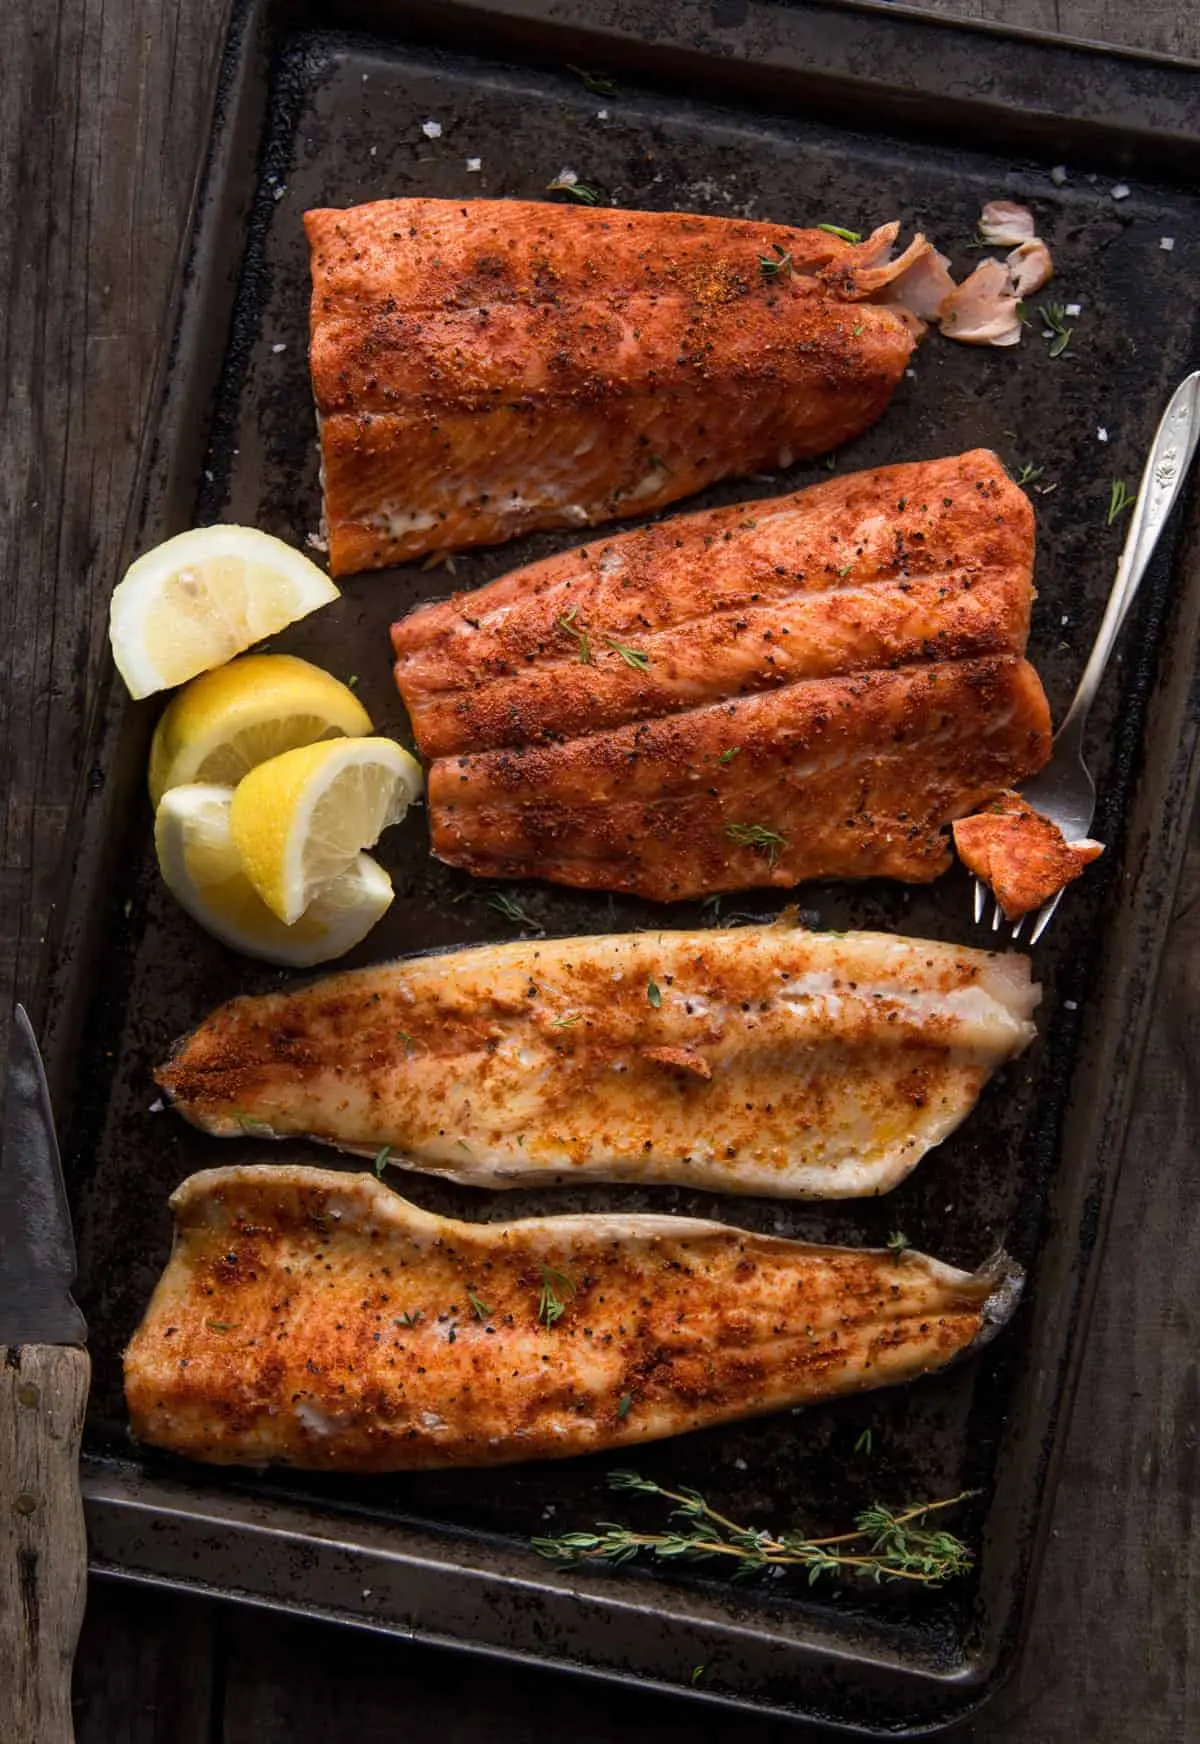 smoked trout fillets - Are smoked trout fillets ready to eat